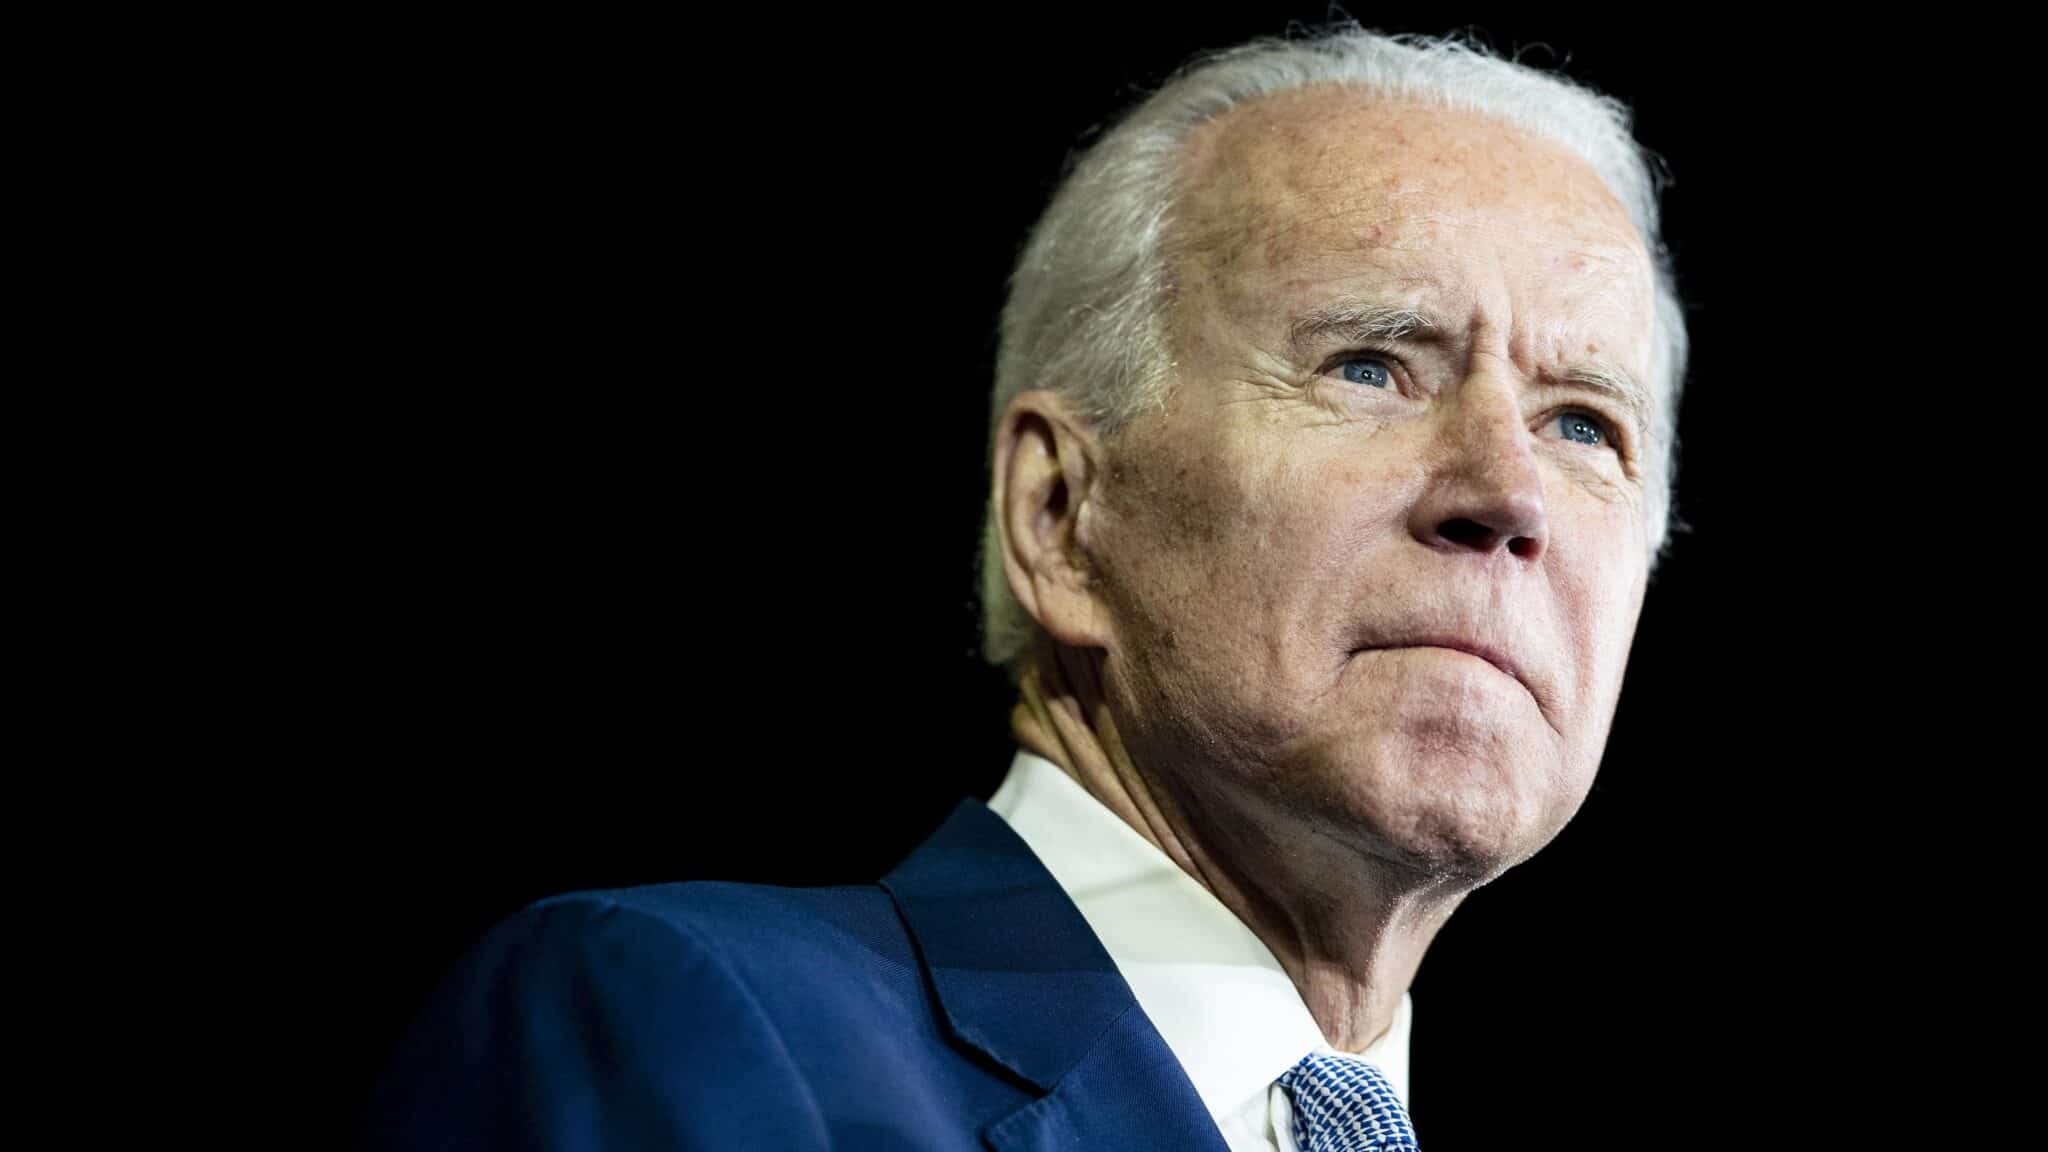 Biden Will Make Americans Fund Research Using Aborted Baby Body Parts